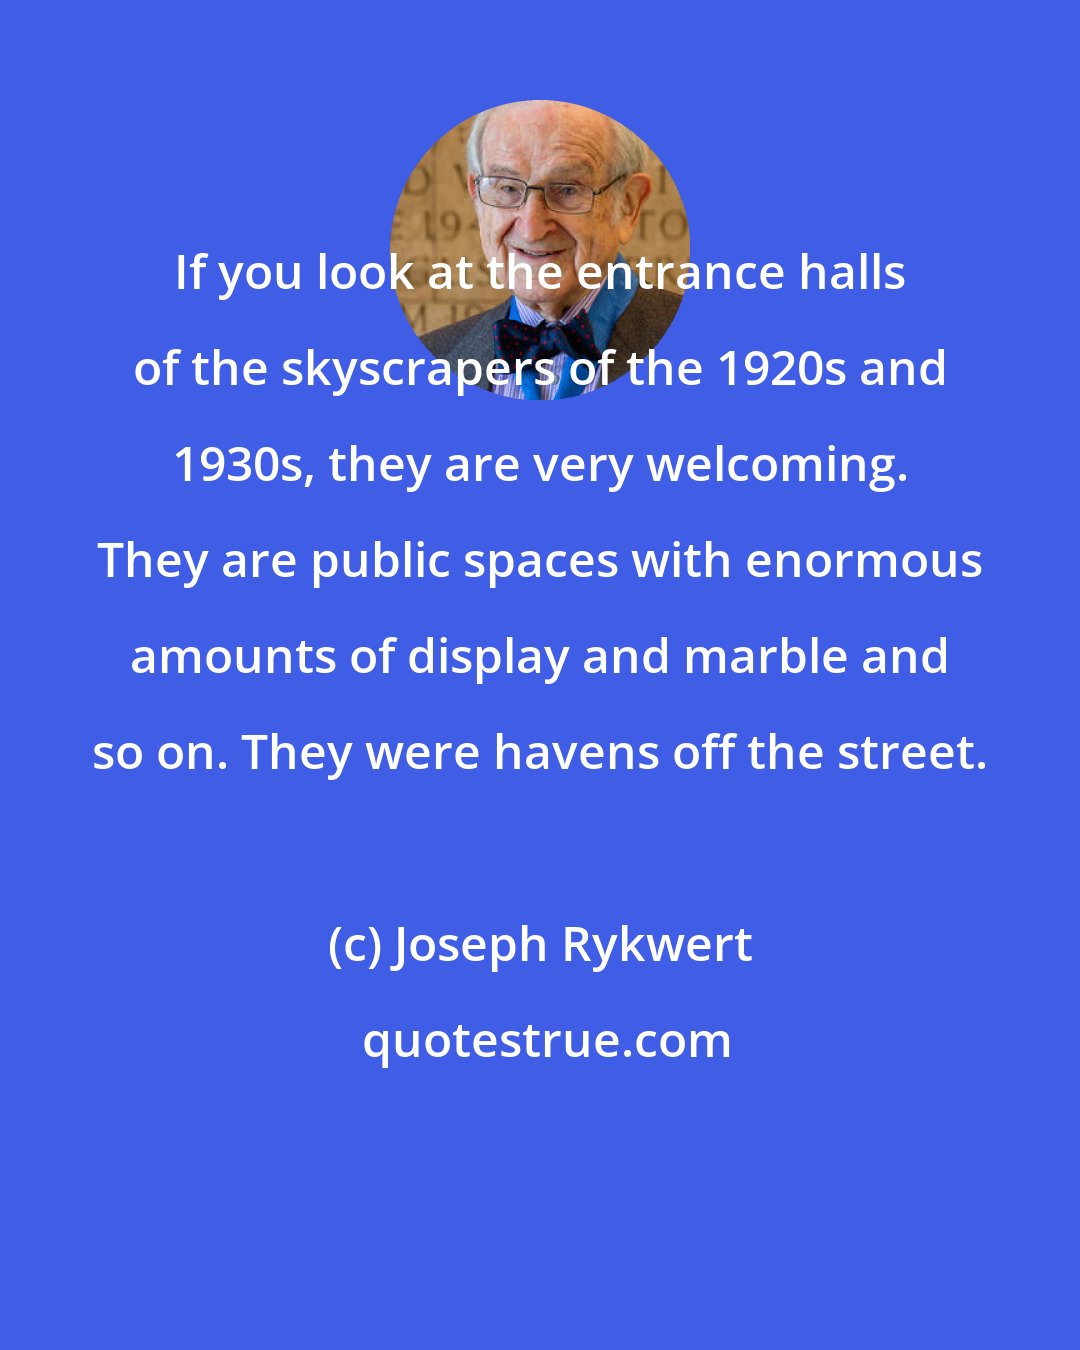 Joseph Rykwert: If you look at the entrance halls of the skyscrapers of the 1920s and 1930s, they are very welcoming. They are public spaces with enormous amounts of display and marble and so on. They were havens off the street.